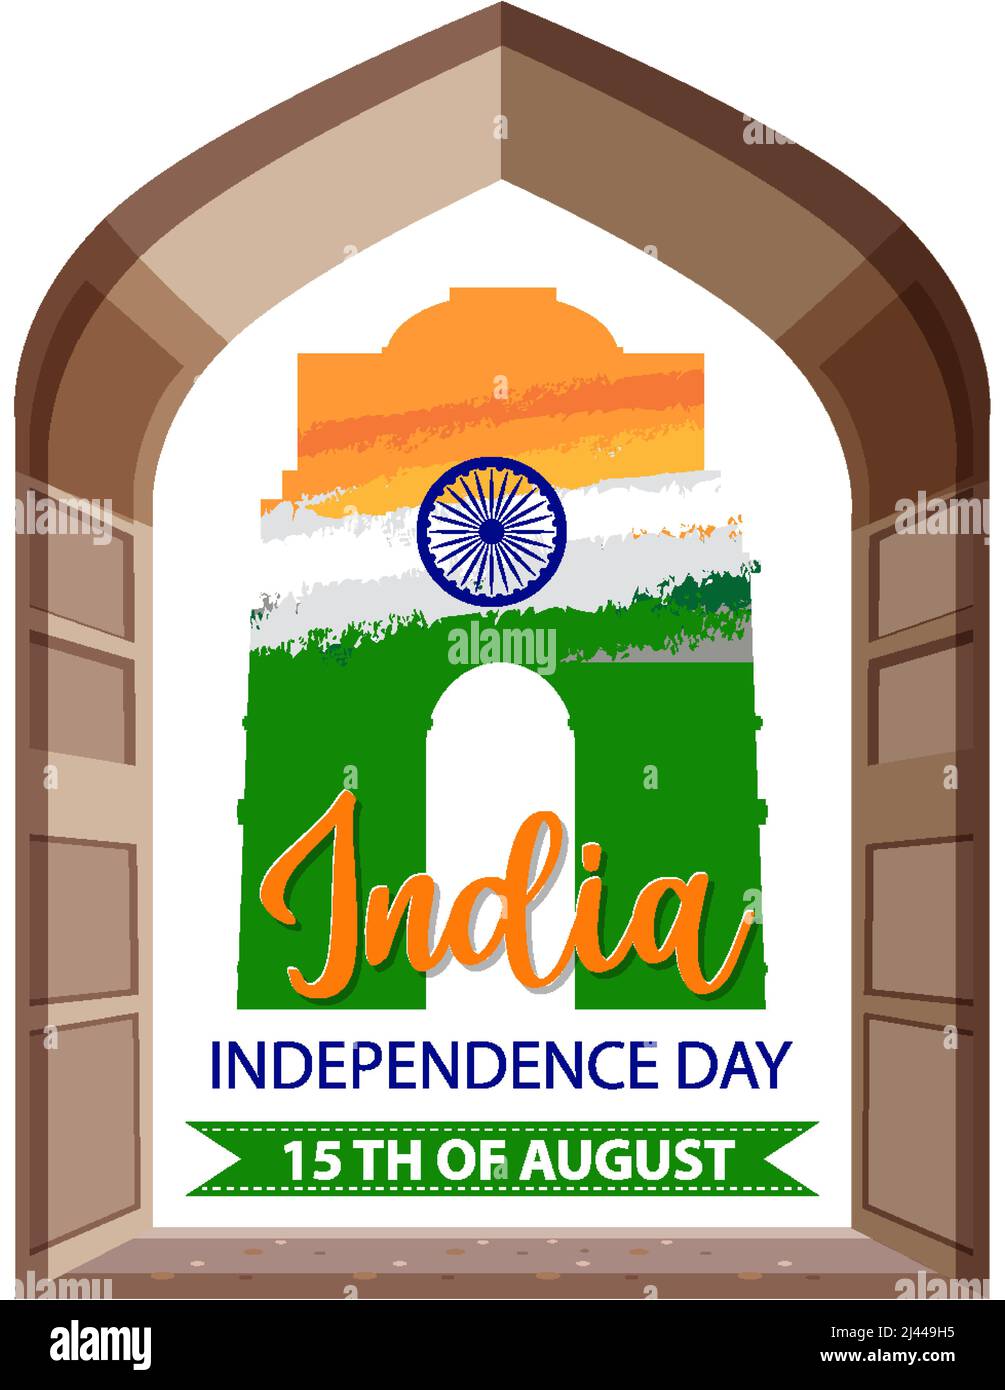 India Independence Day Poster illustration Stock Vector